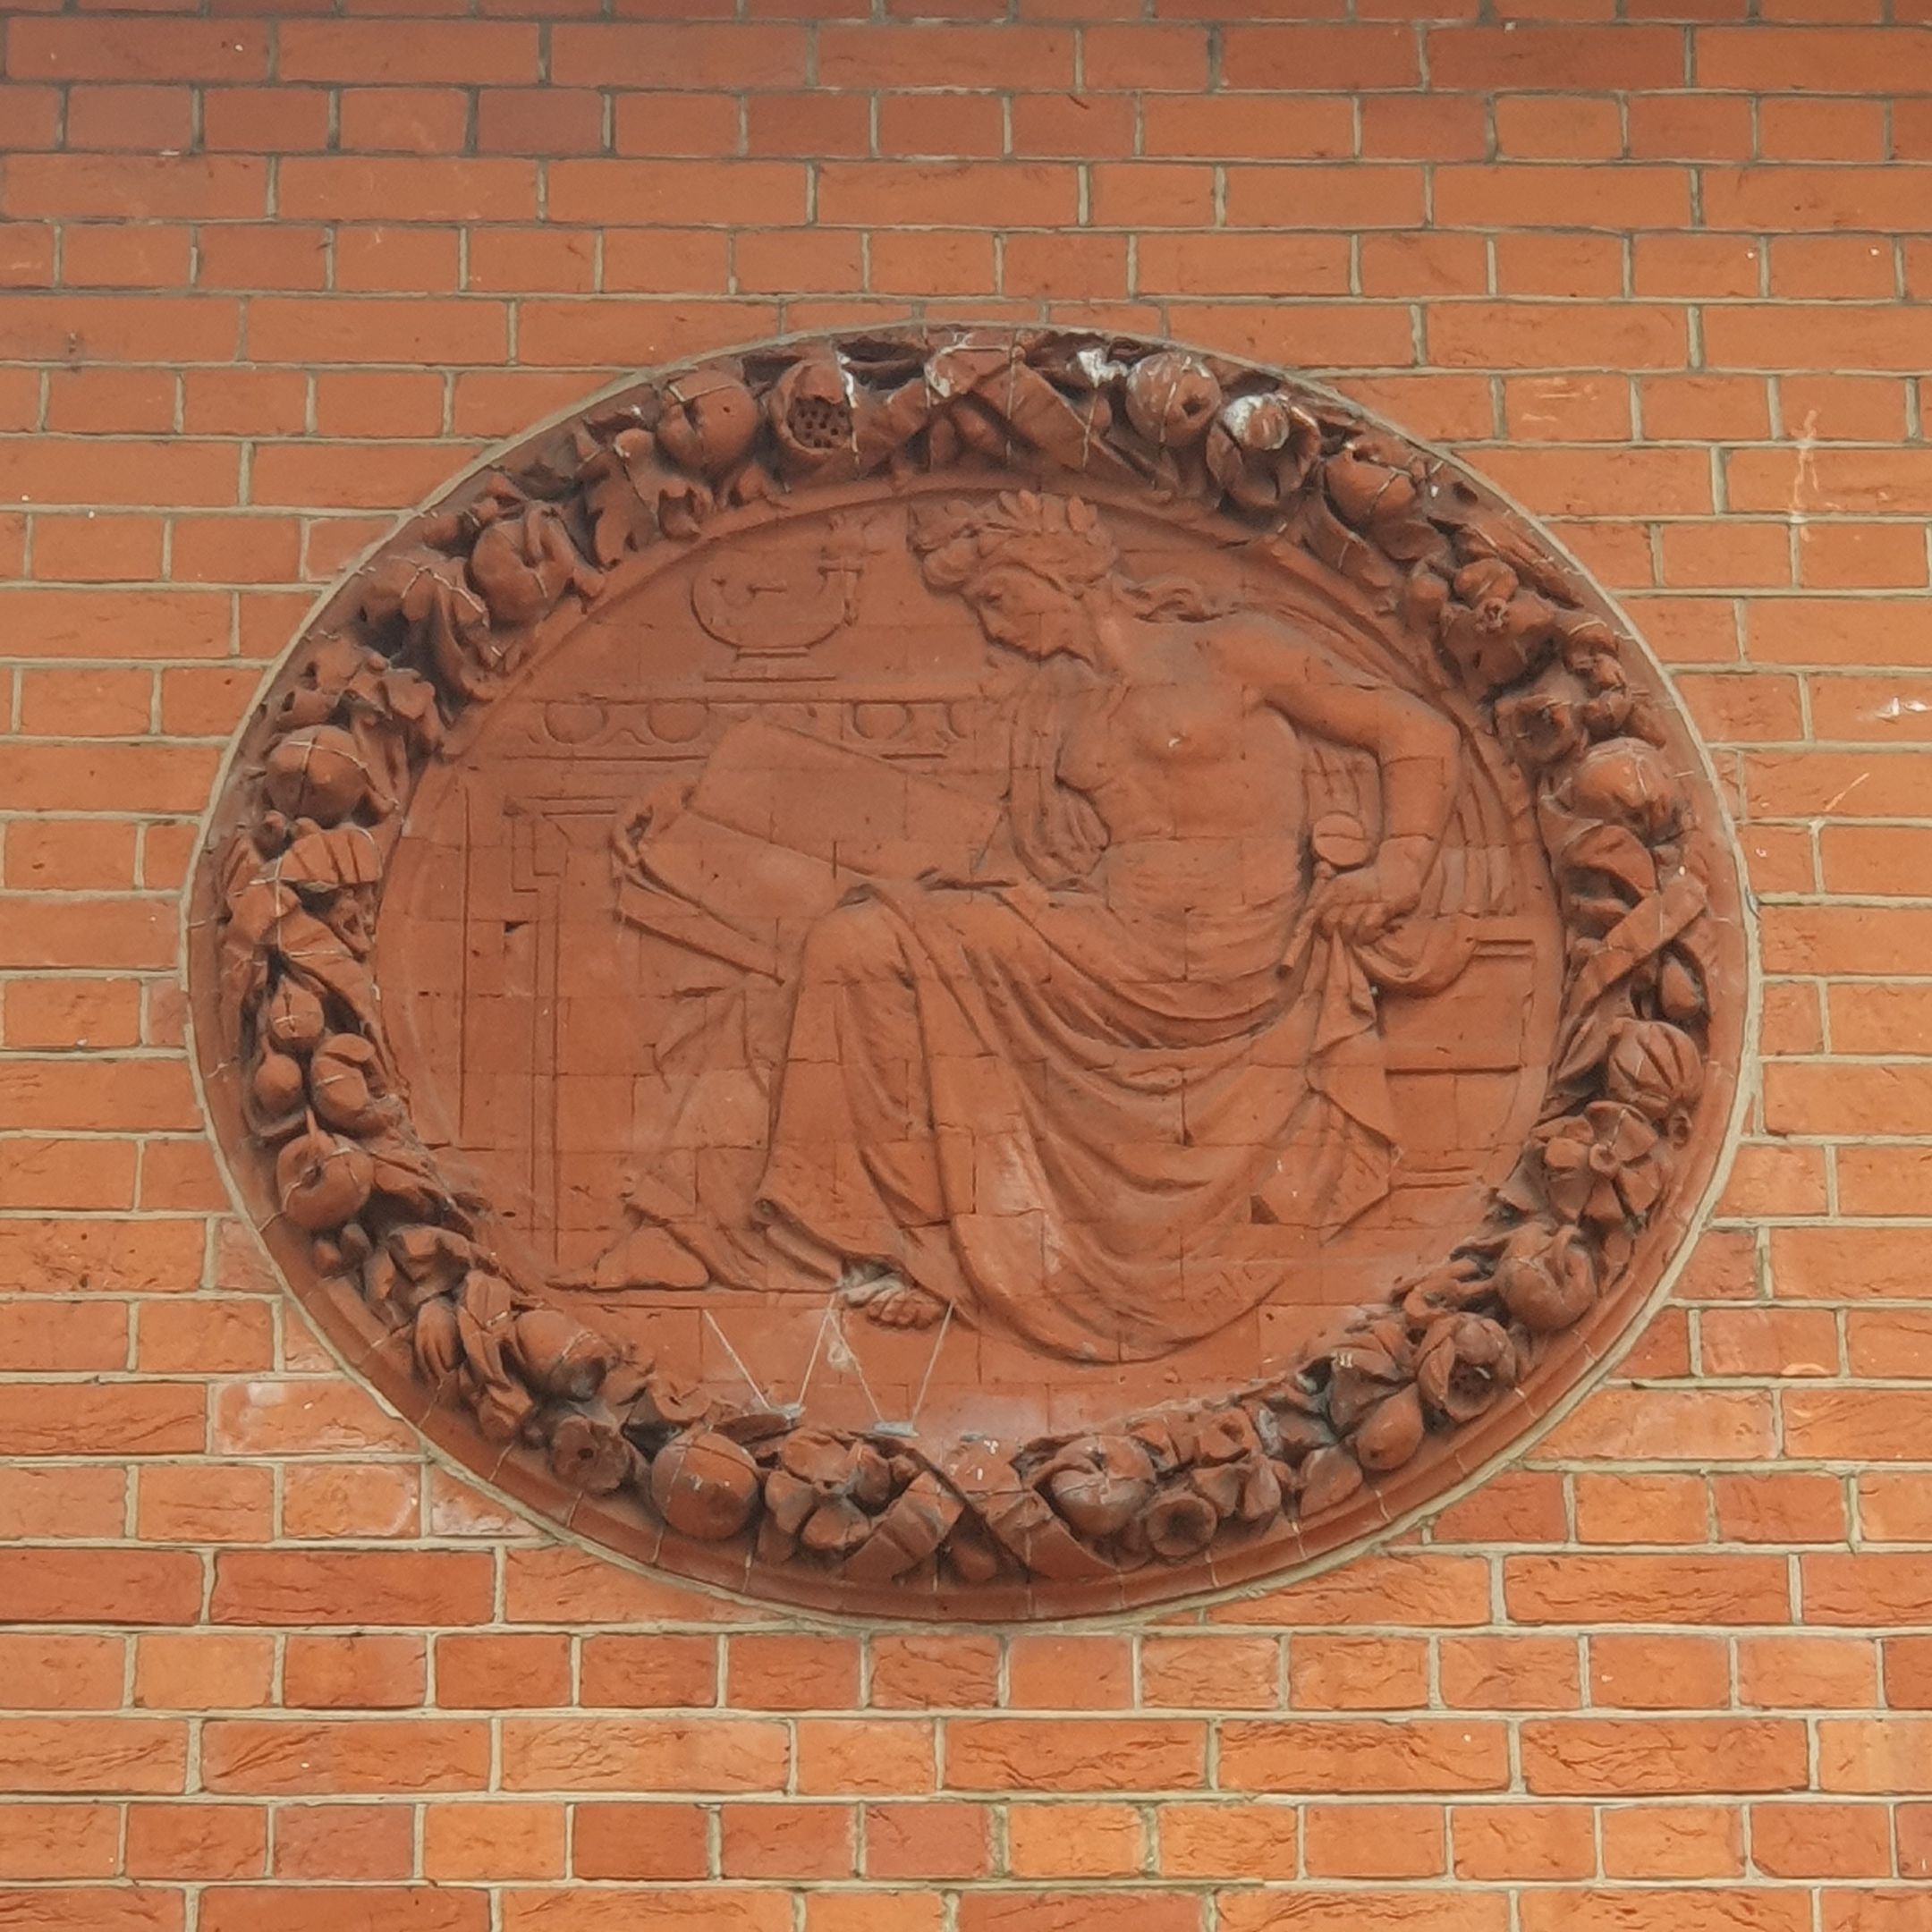 crest on the museum